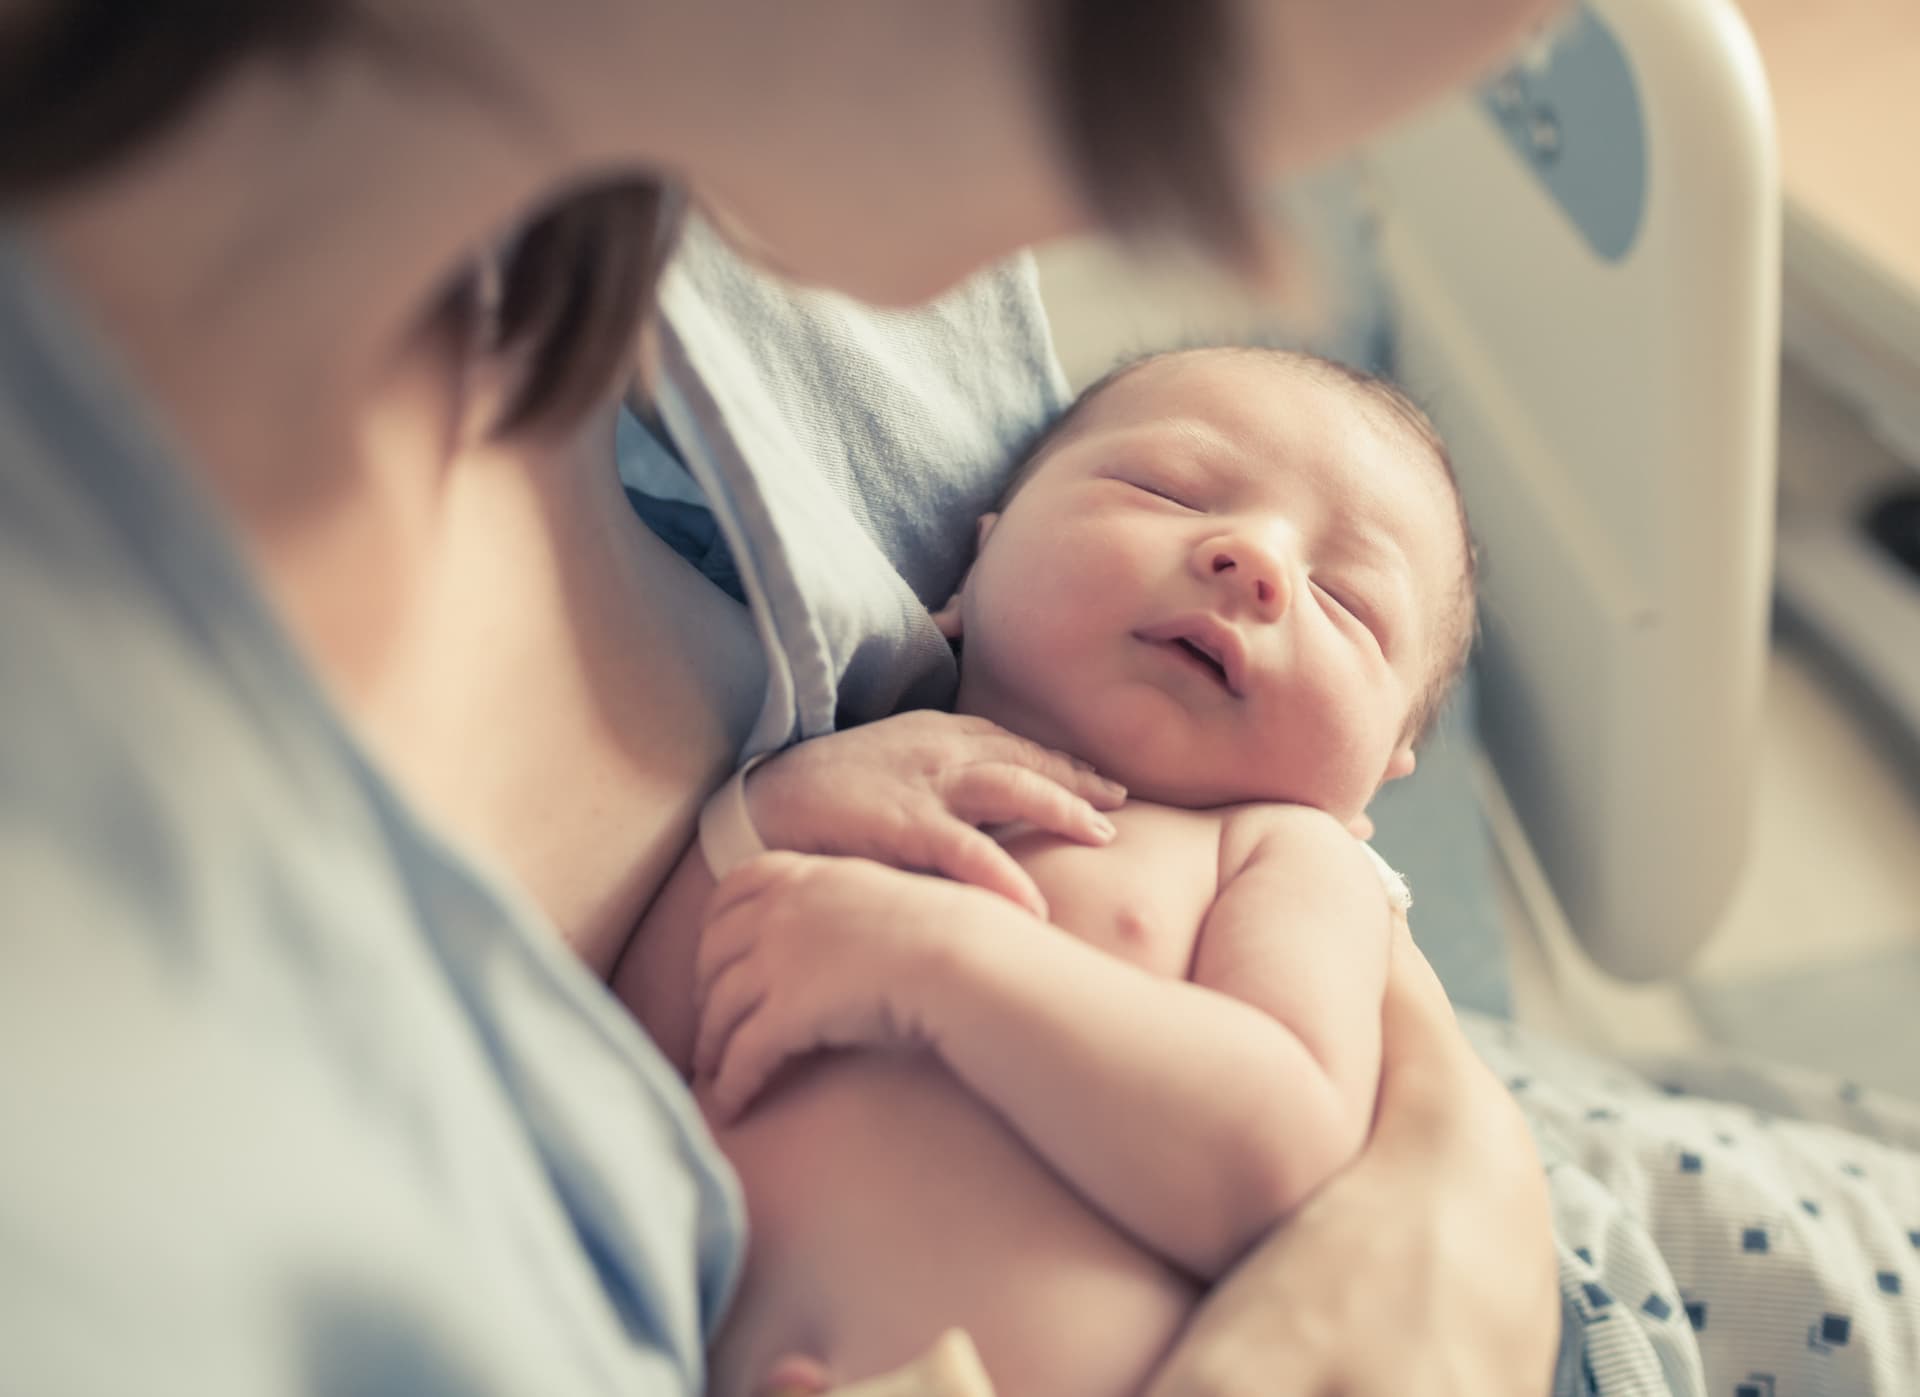 How Long Does a C-Section Take? All You Need To Know